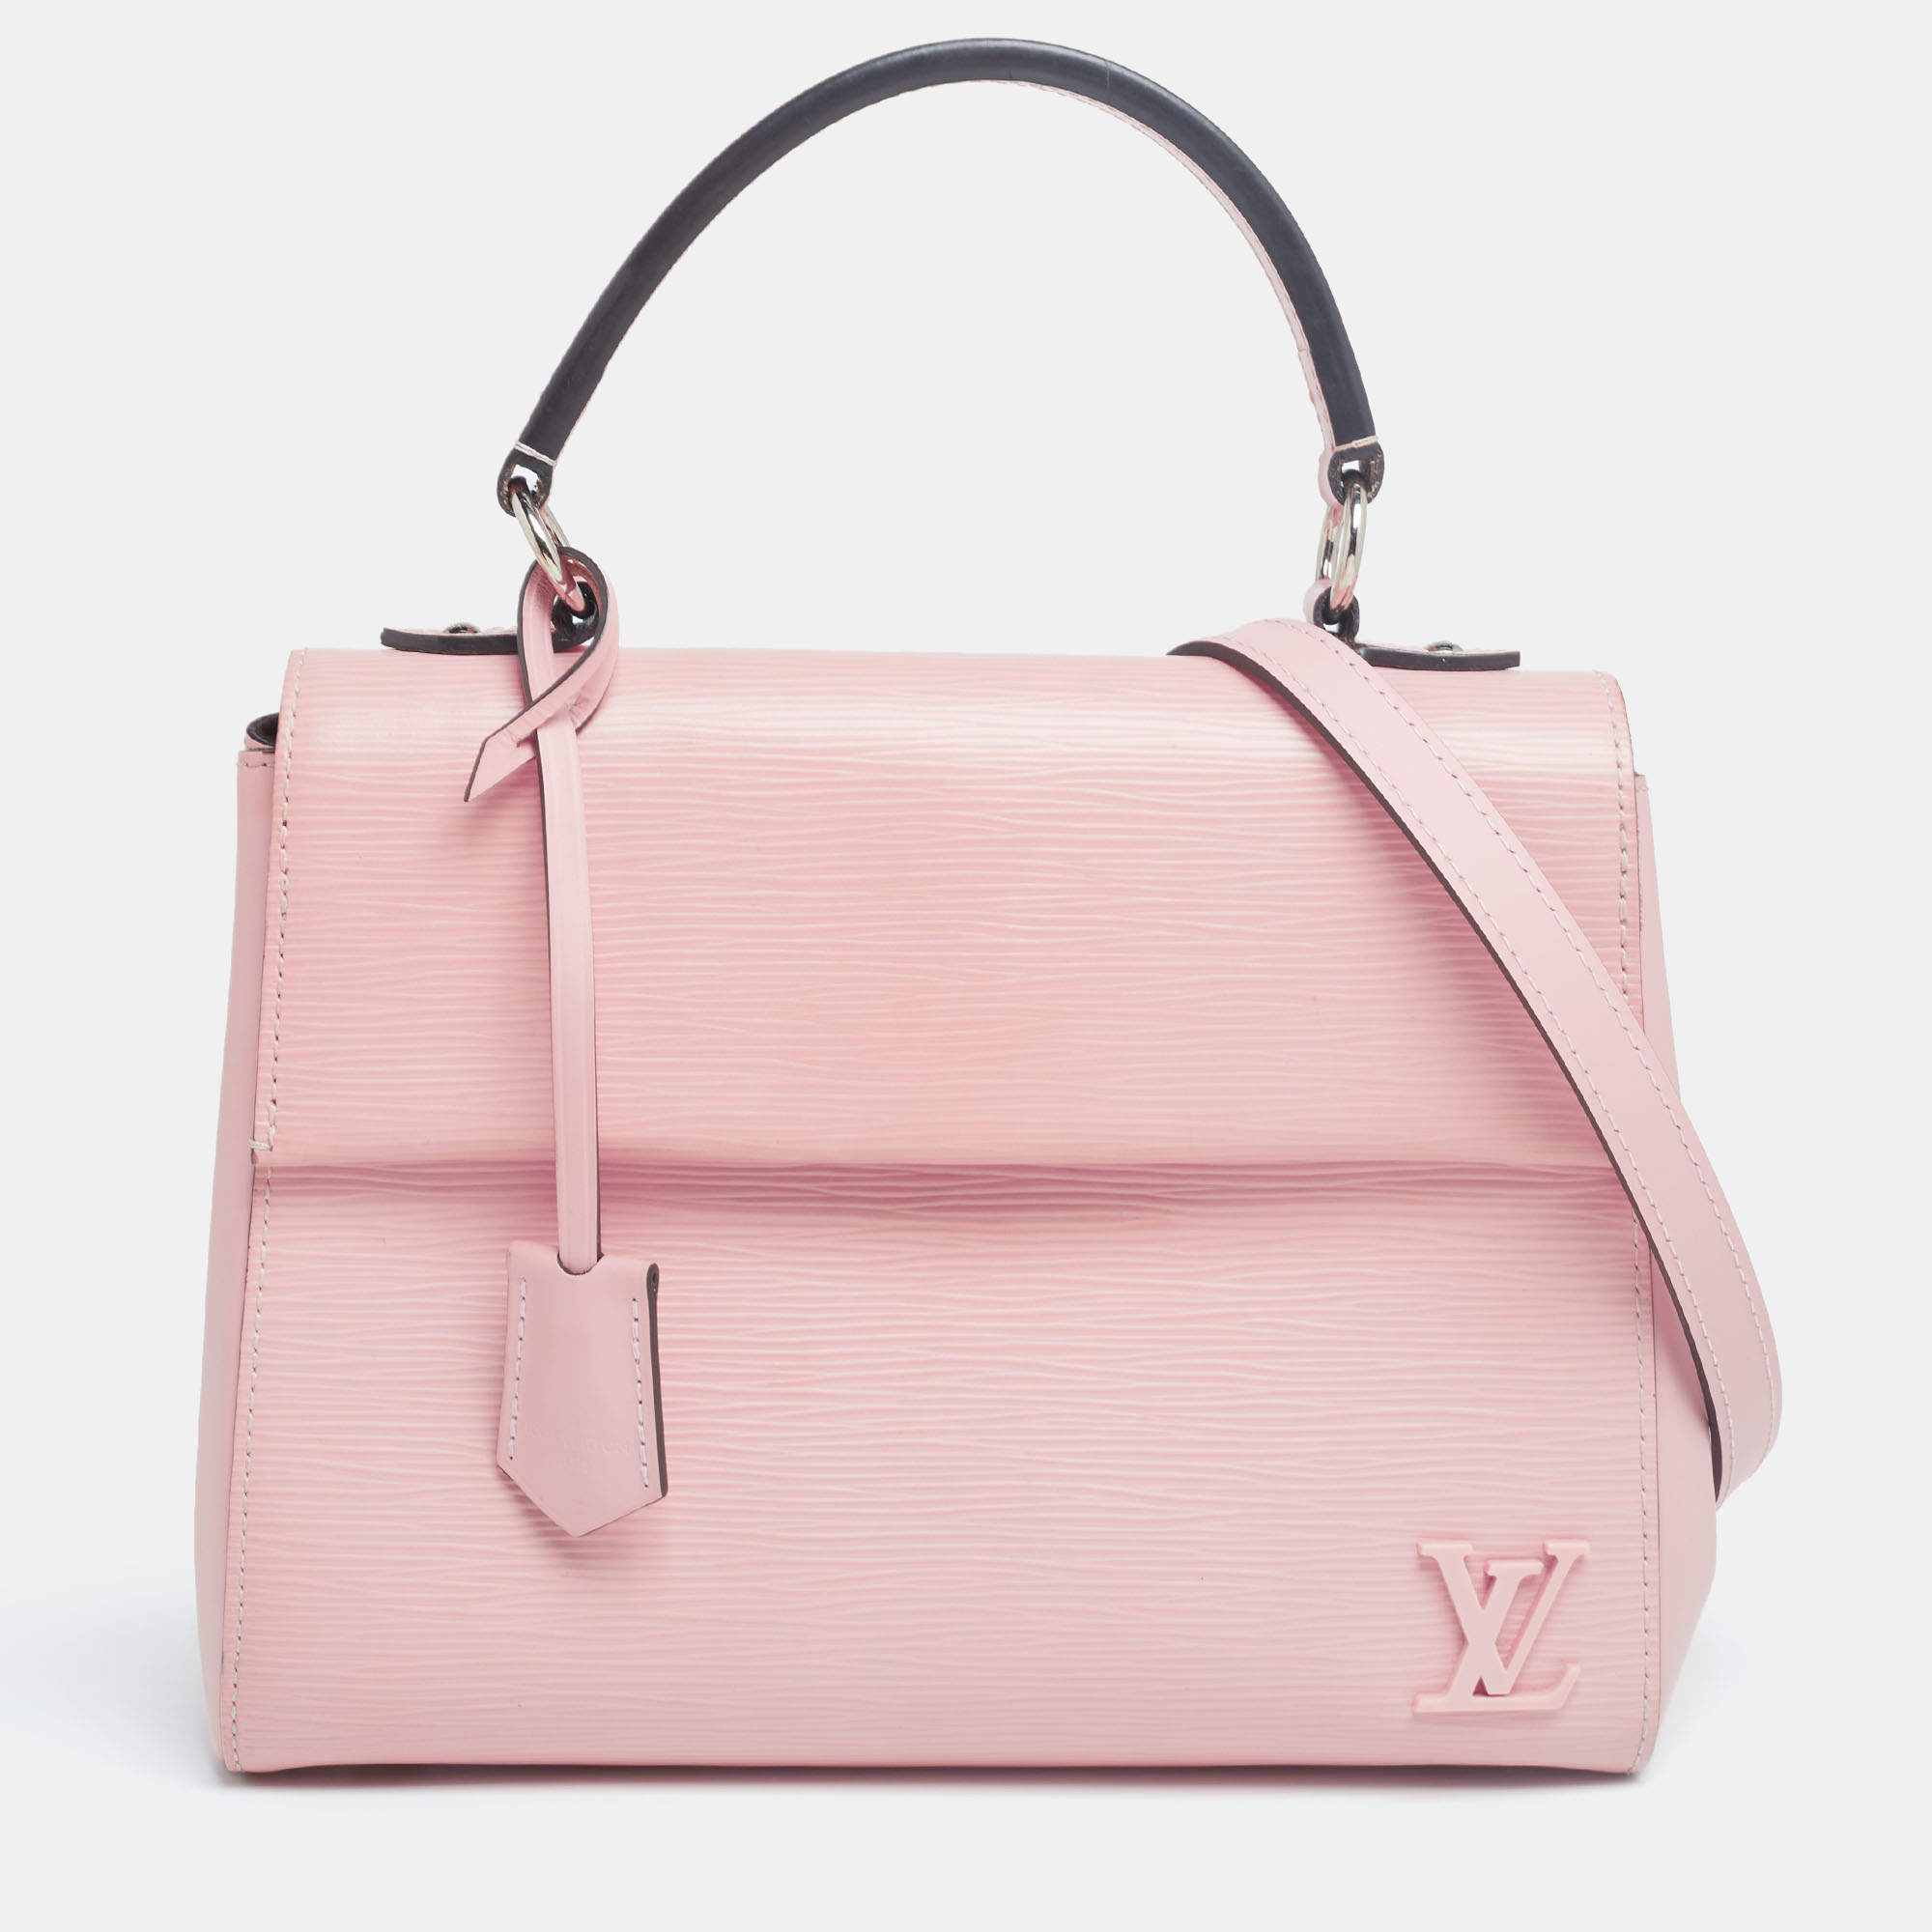 Louis Vuitton LV Women Grenelle MM Bag in Emblematic Epi Leather